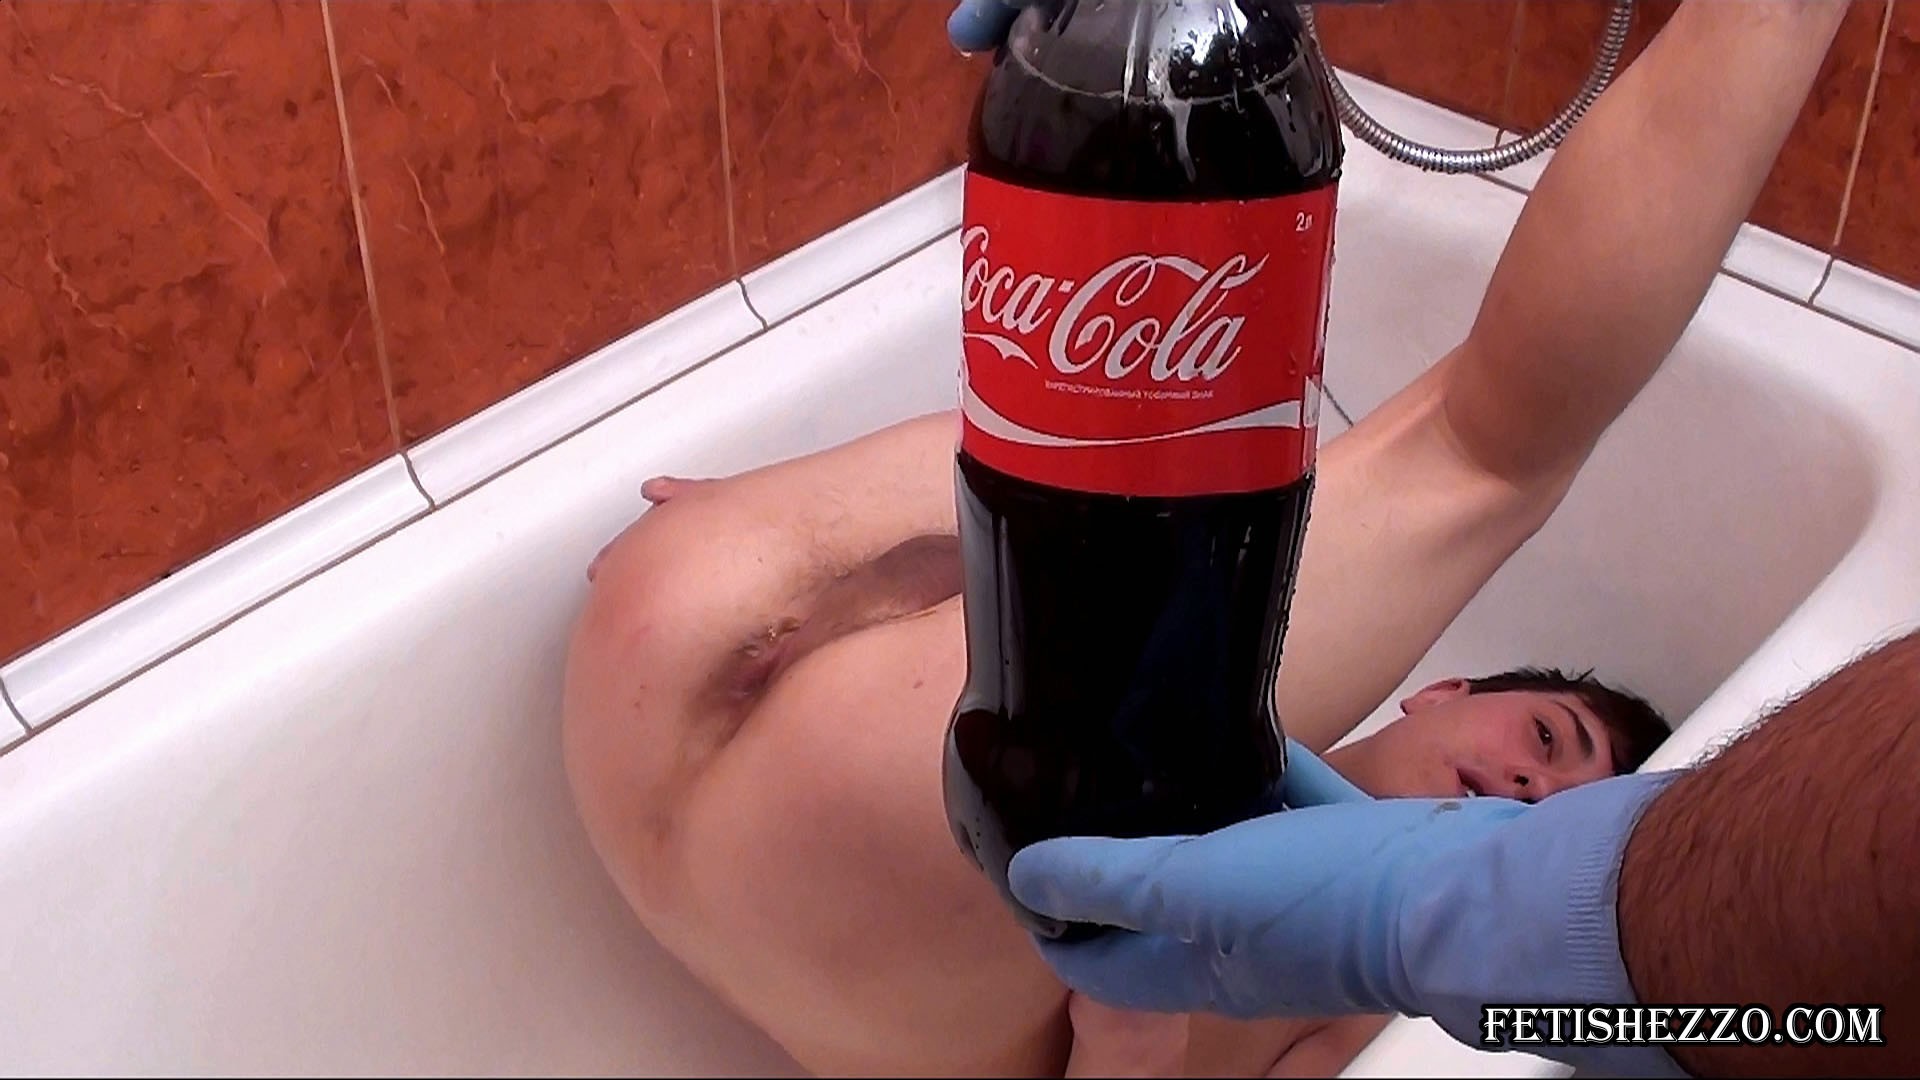 Boy gets a coke enema and gushes out liquid